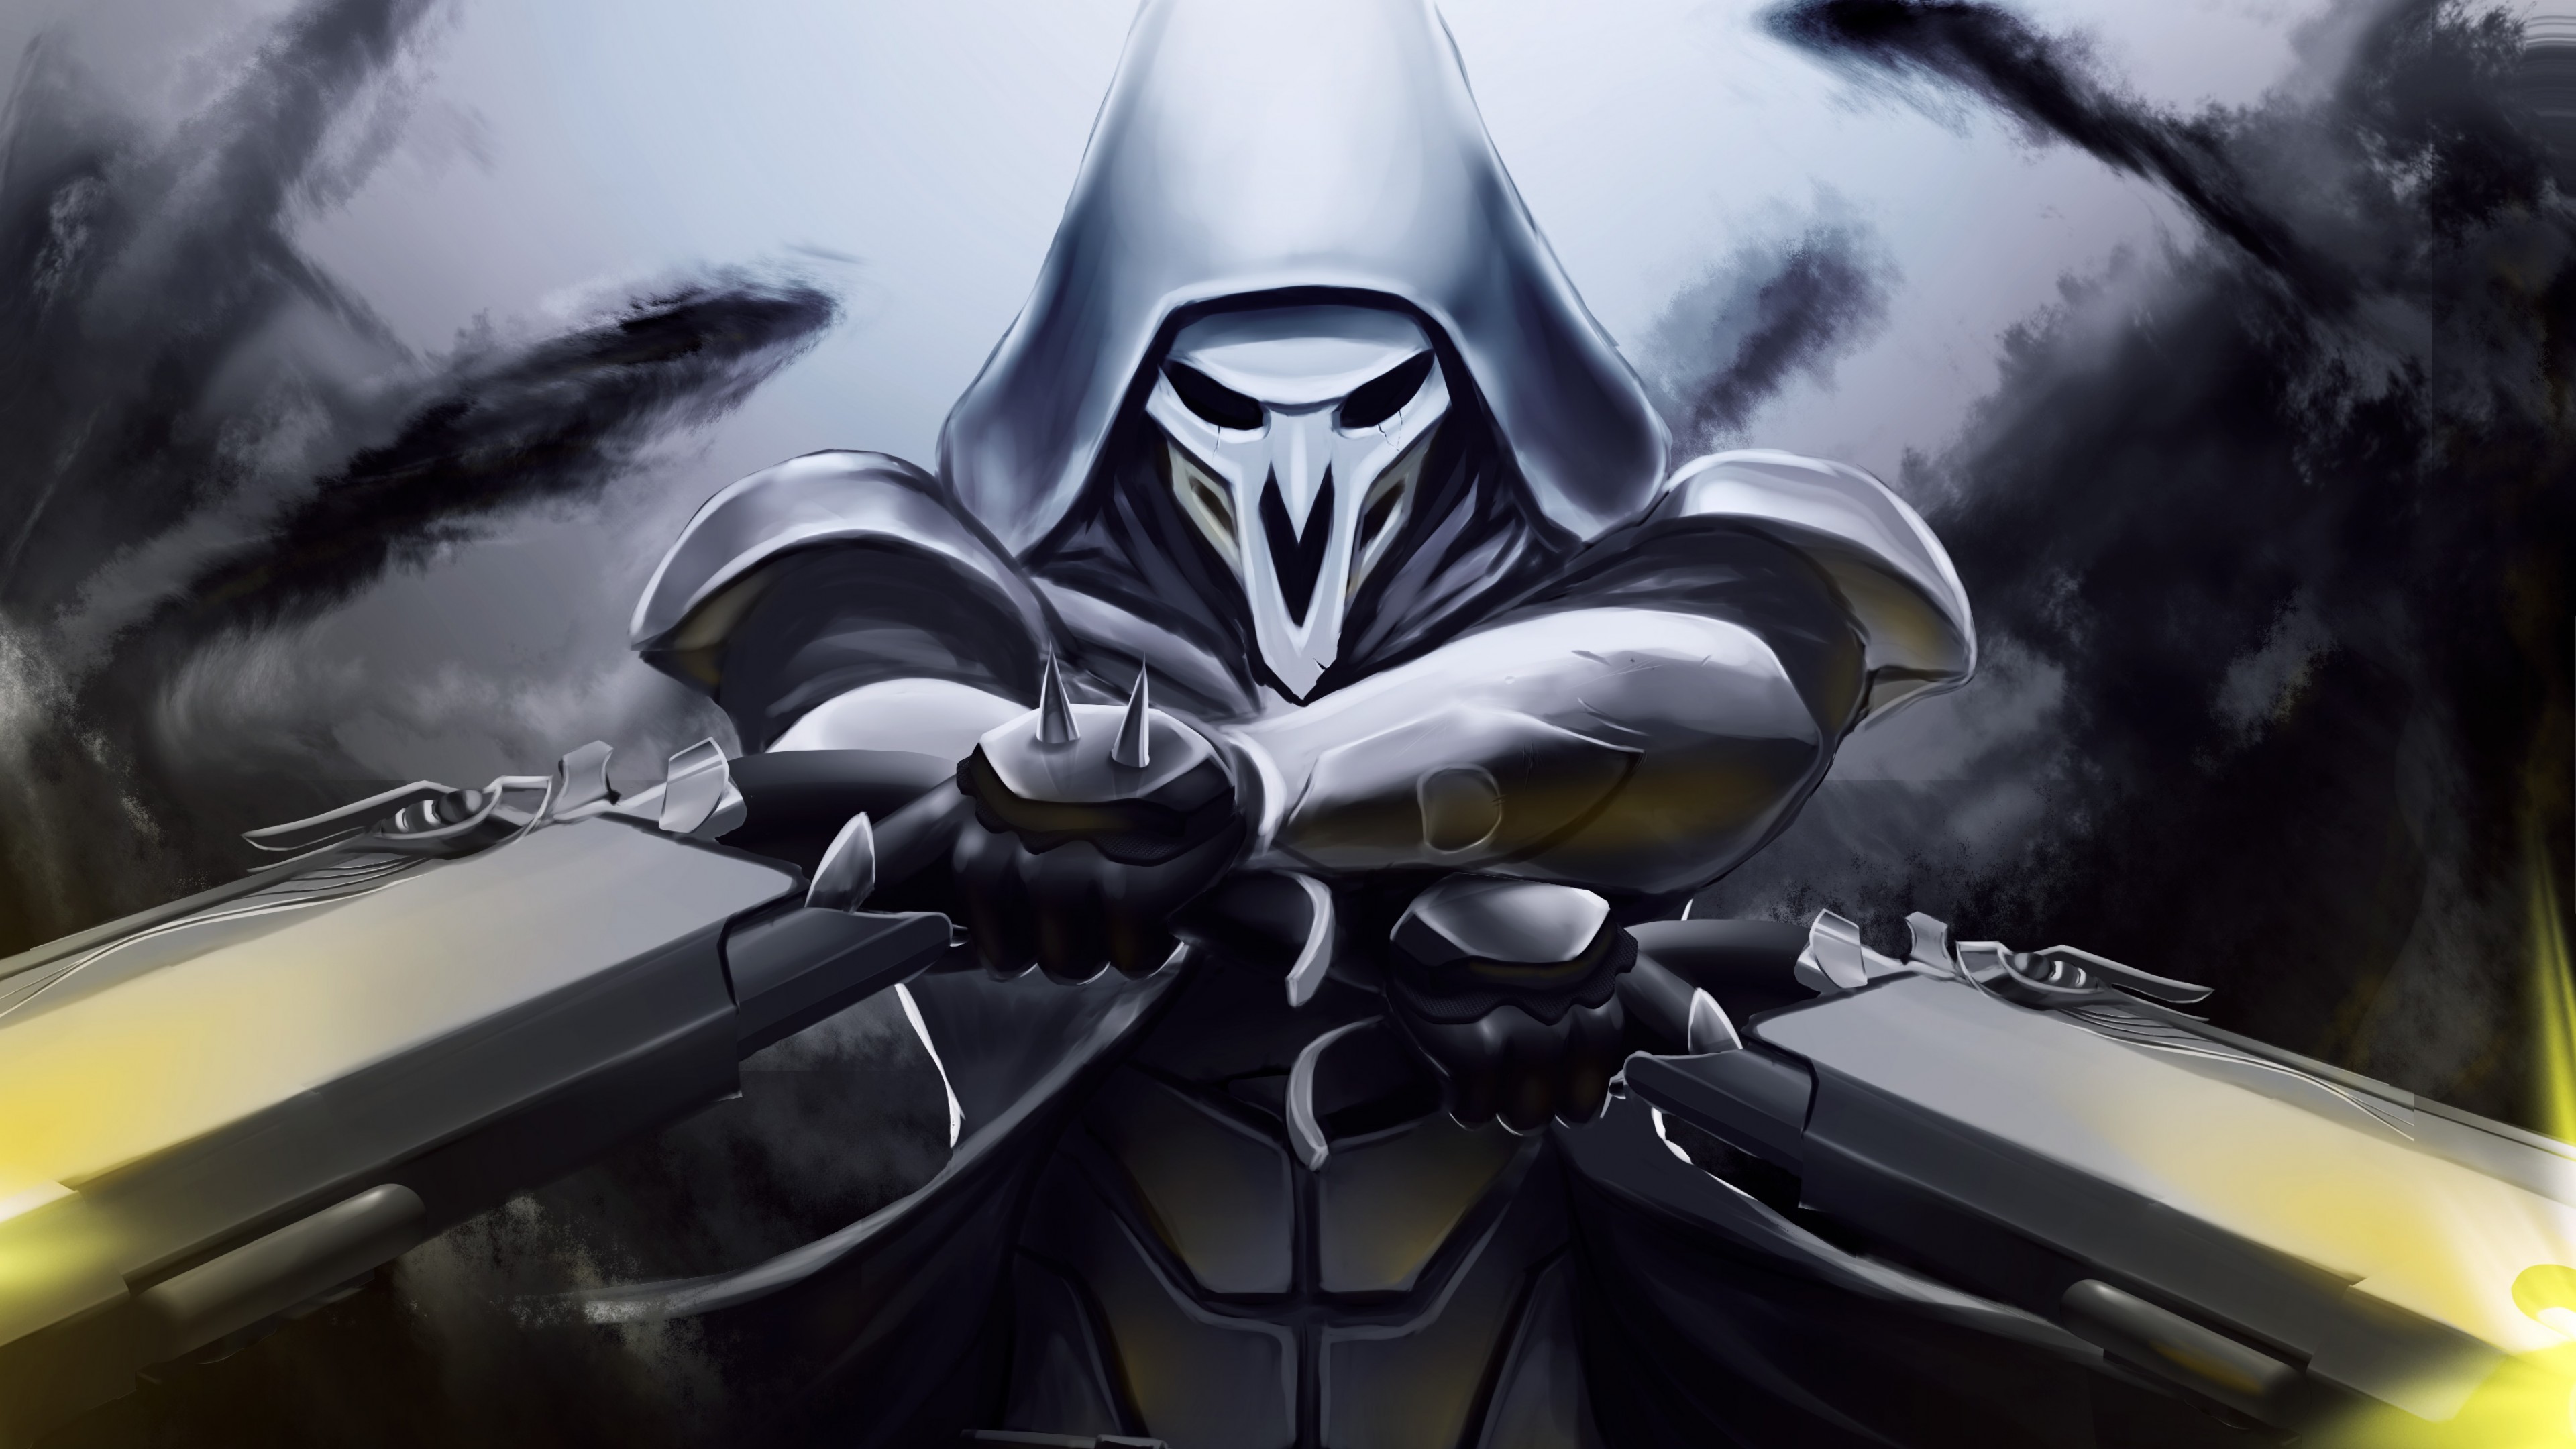 3840x2160 Tags: Reaper, Overwatch ...